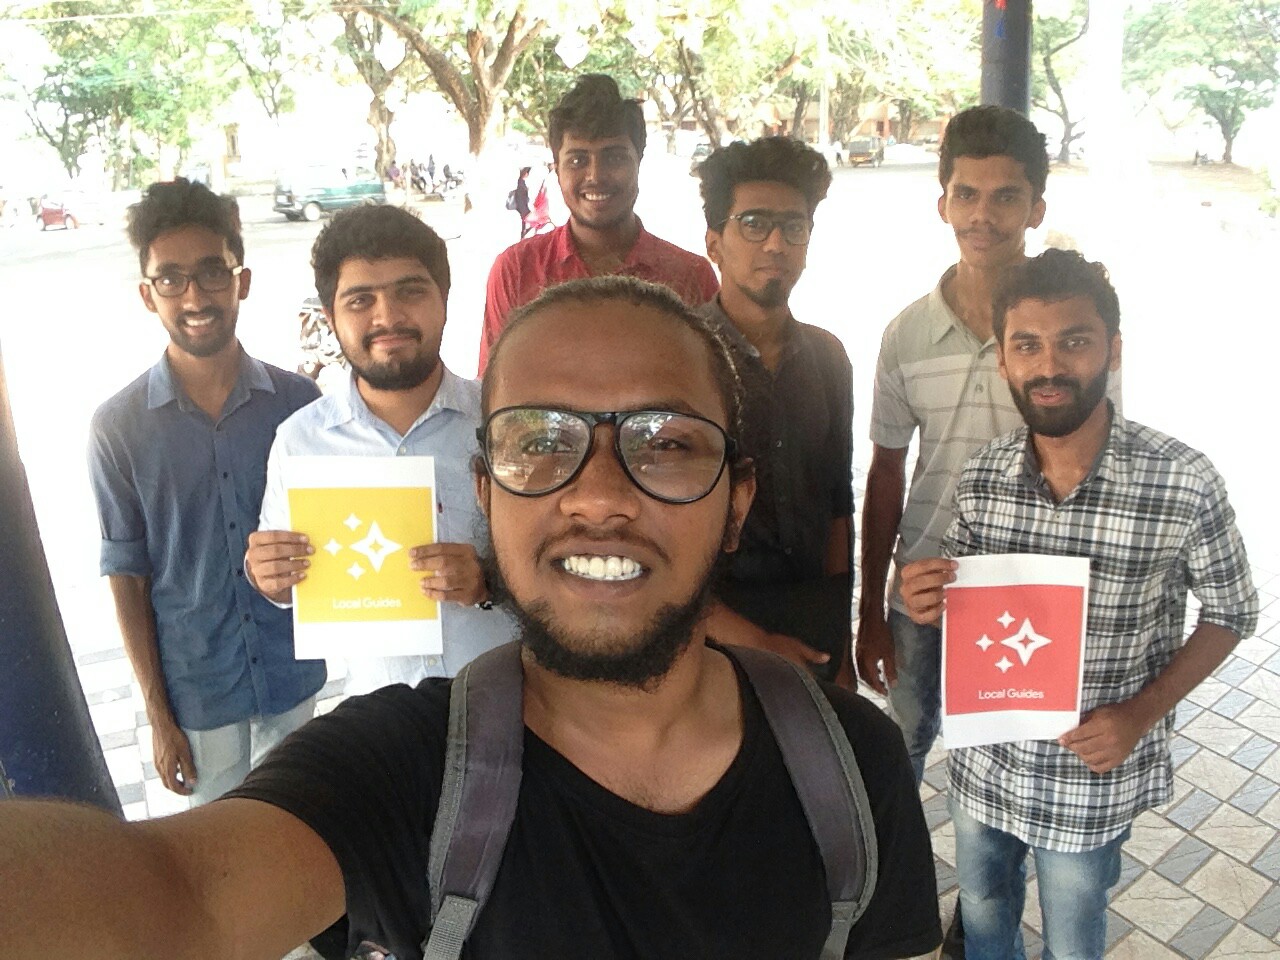 [RECAP] Cusat Photo Walk 27 March 2018 - Local Guides Connect